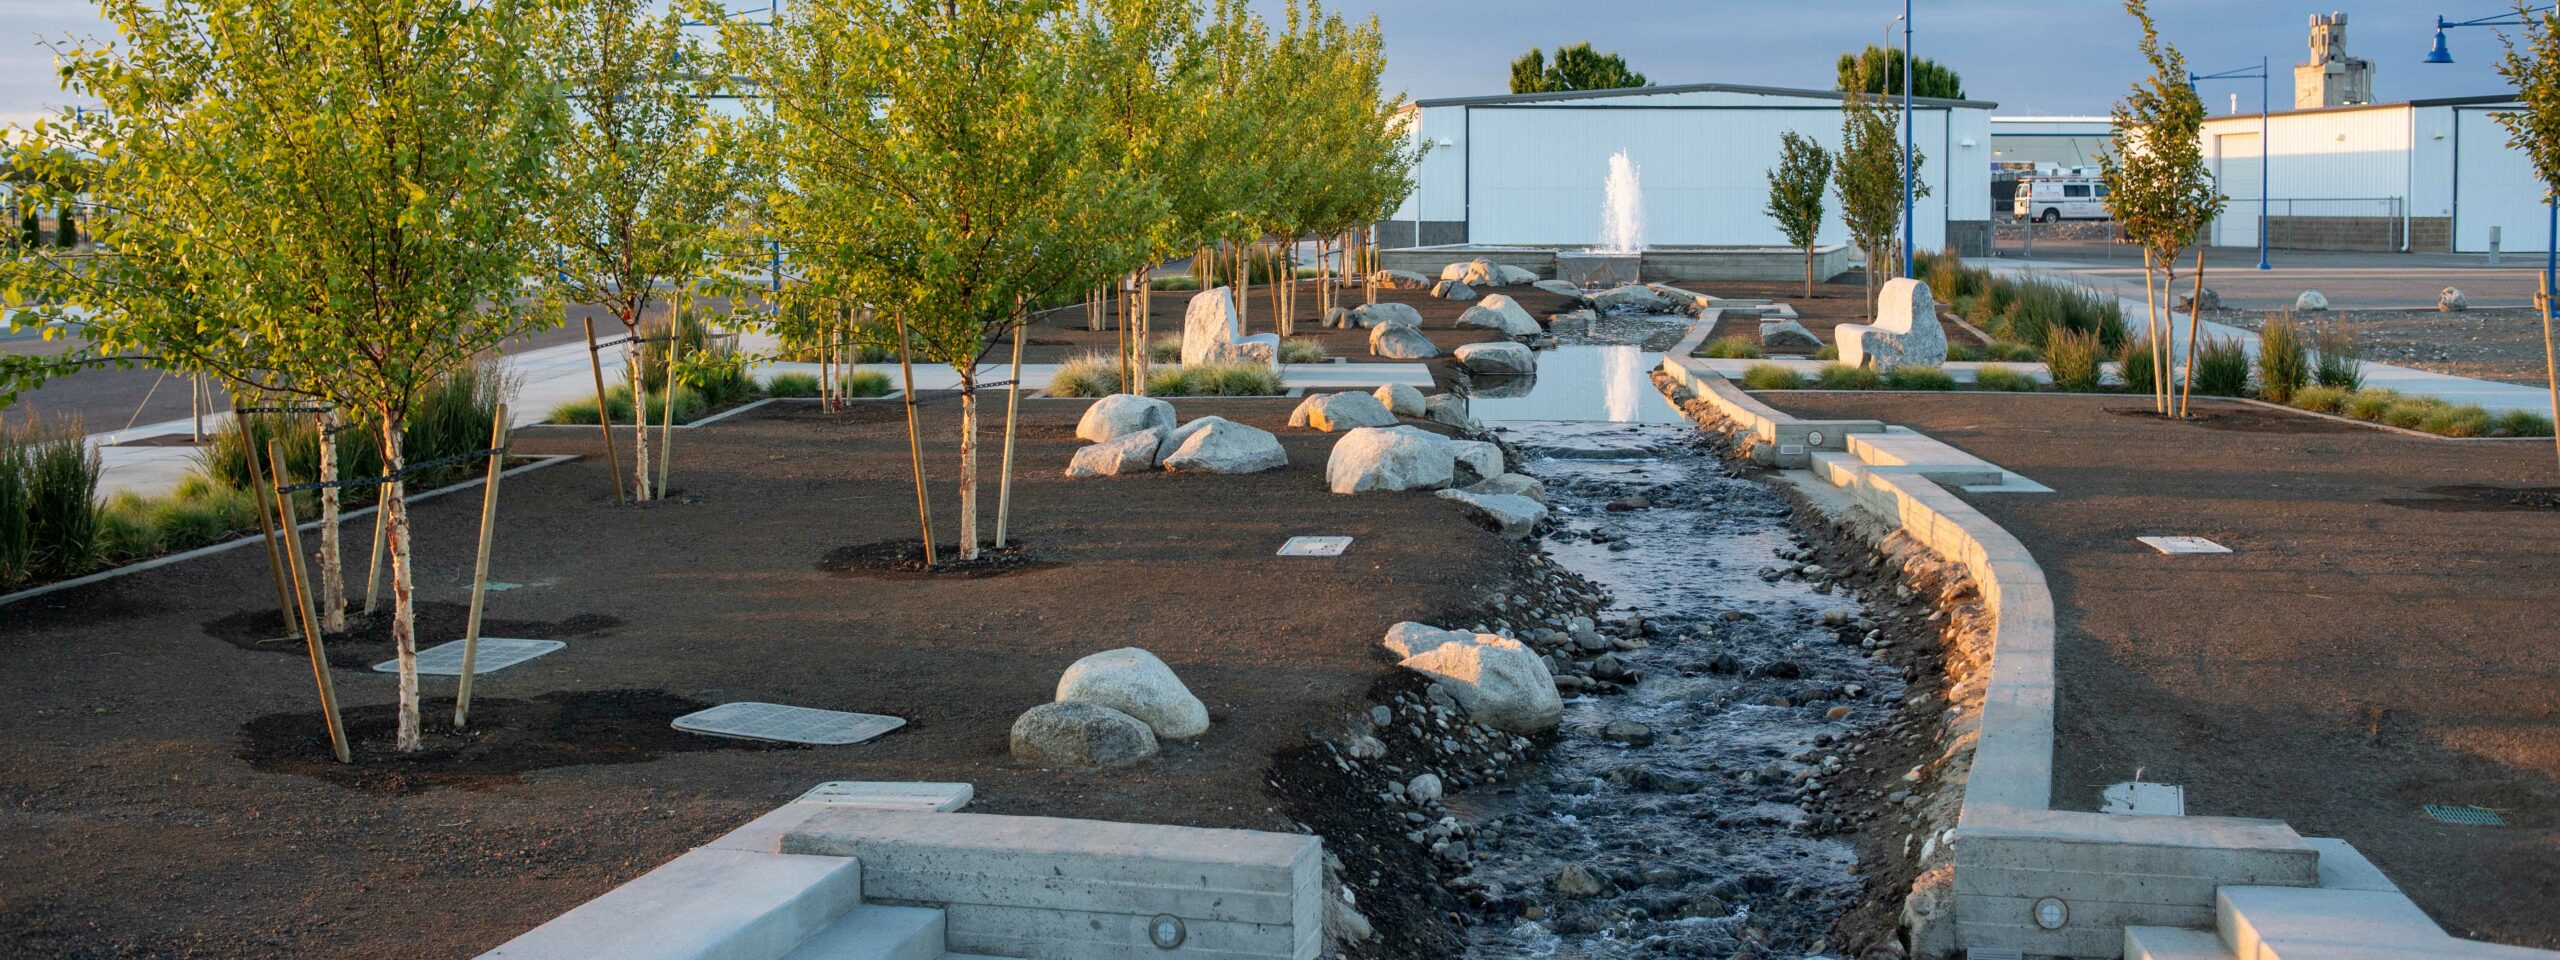 Vista Field water features and landscaping that were completed during the phase one infrastructure work.